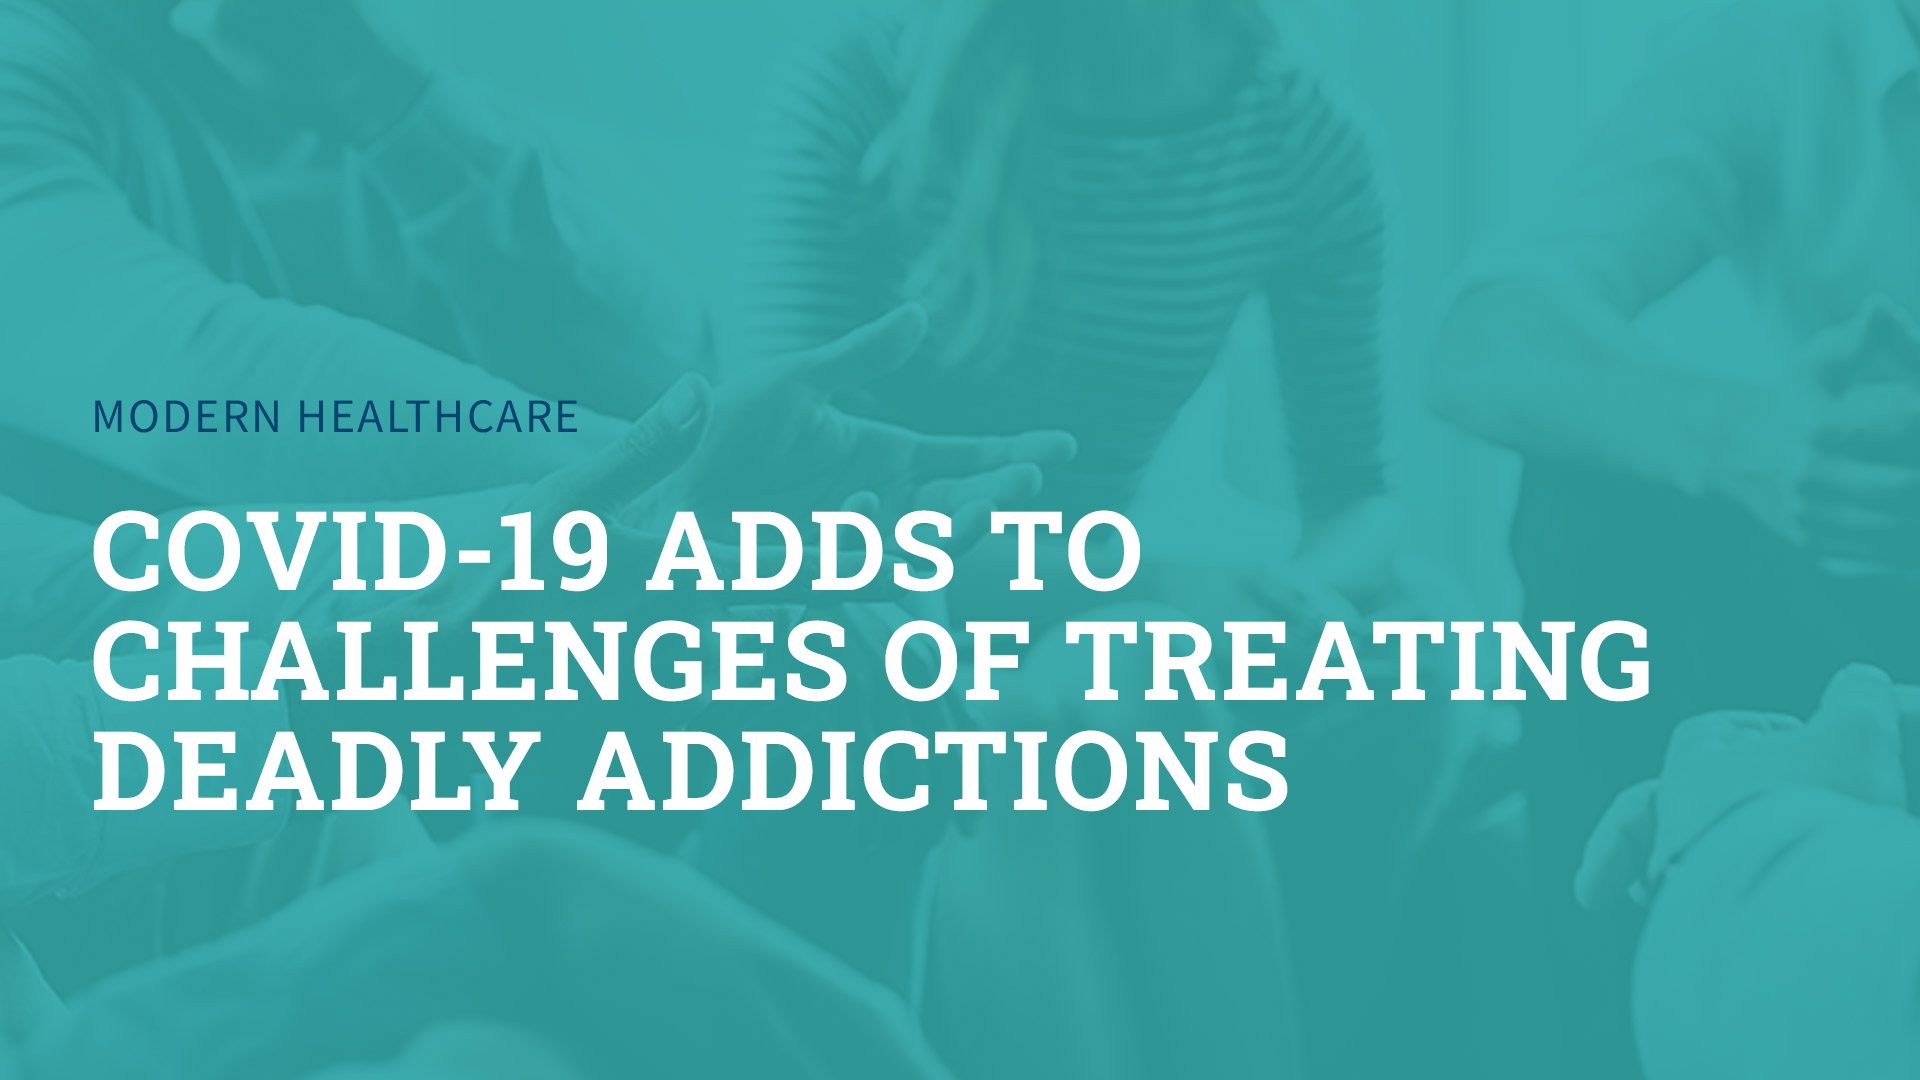 COVID-19 Adds to Challenges of Treating Deadly Addictions